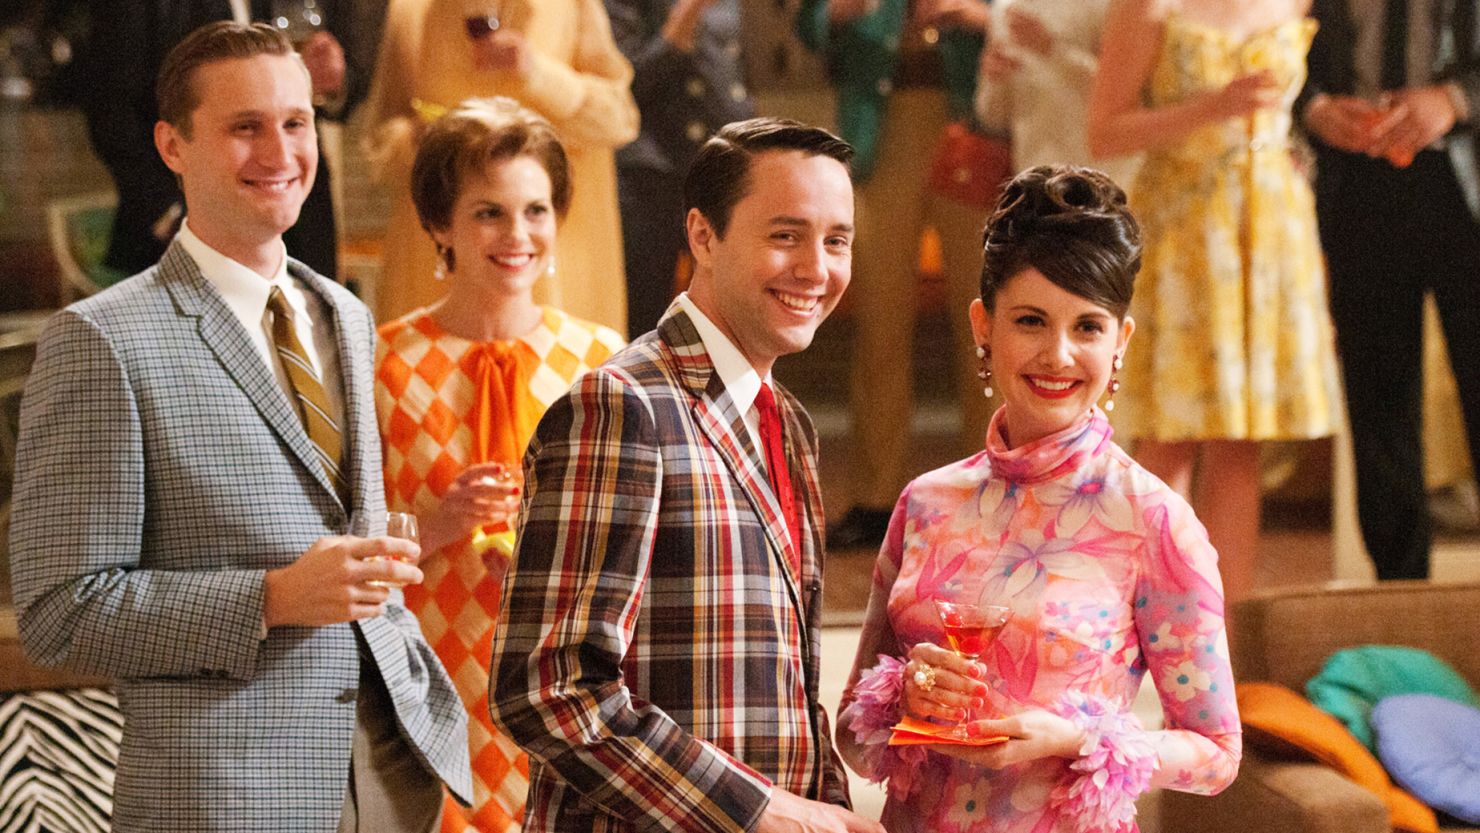 Actor Vincent Kartheiser (second from right) sports a madras blazer in a 2012 episode of "Mad Men."